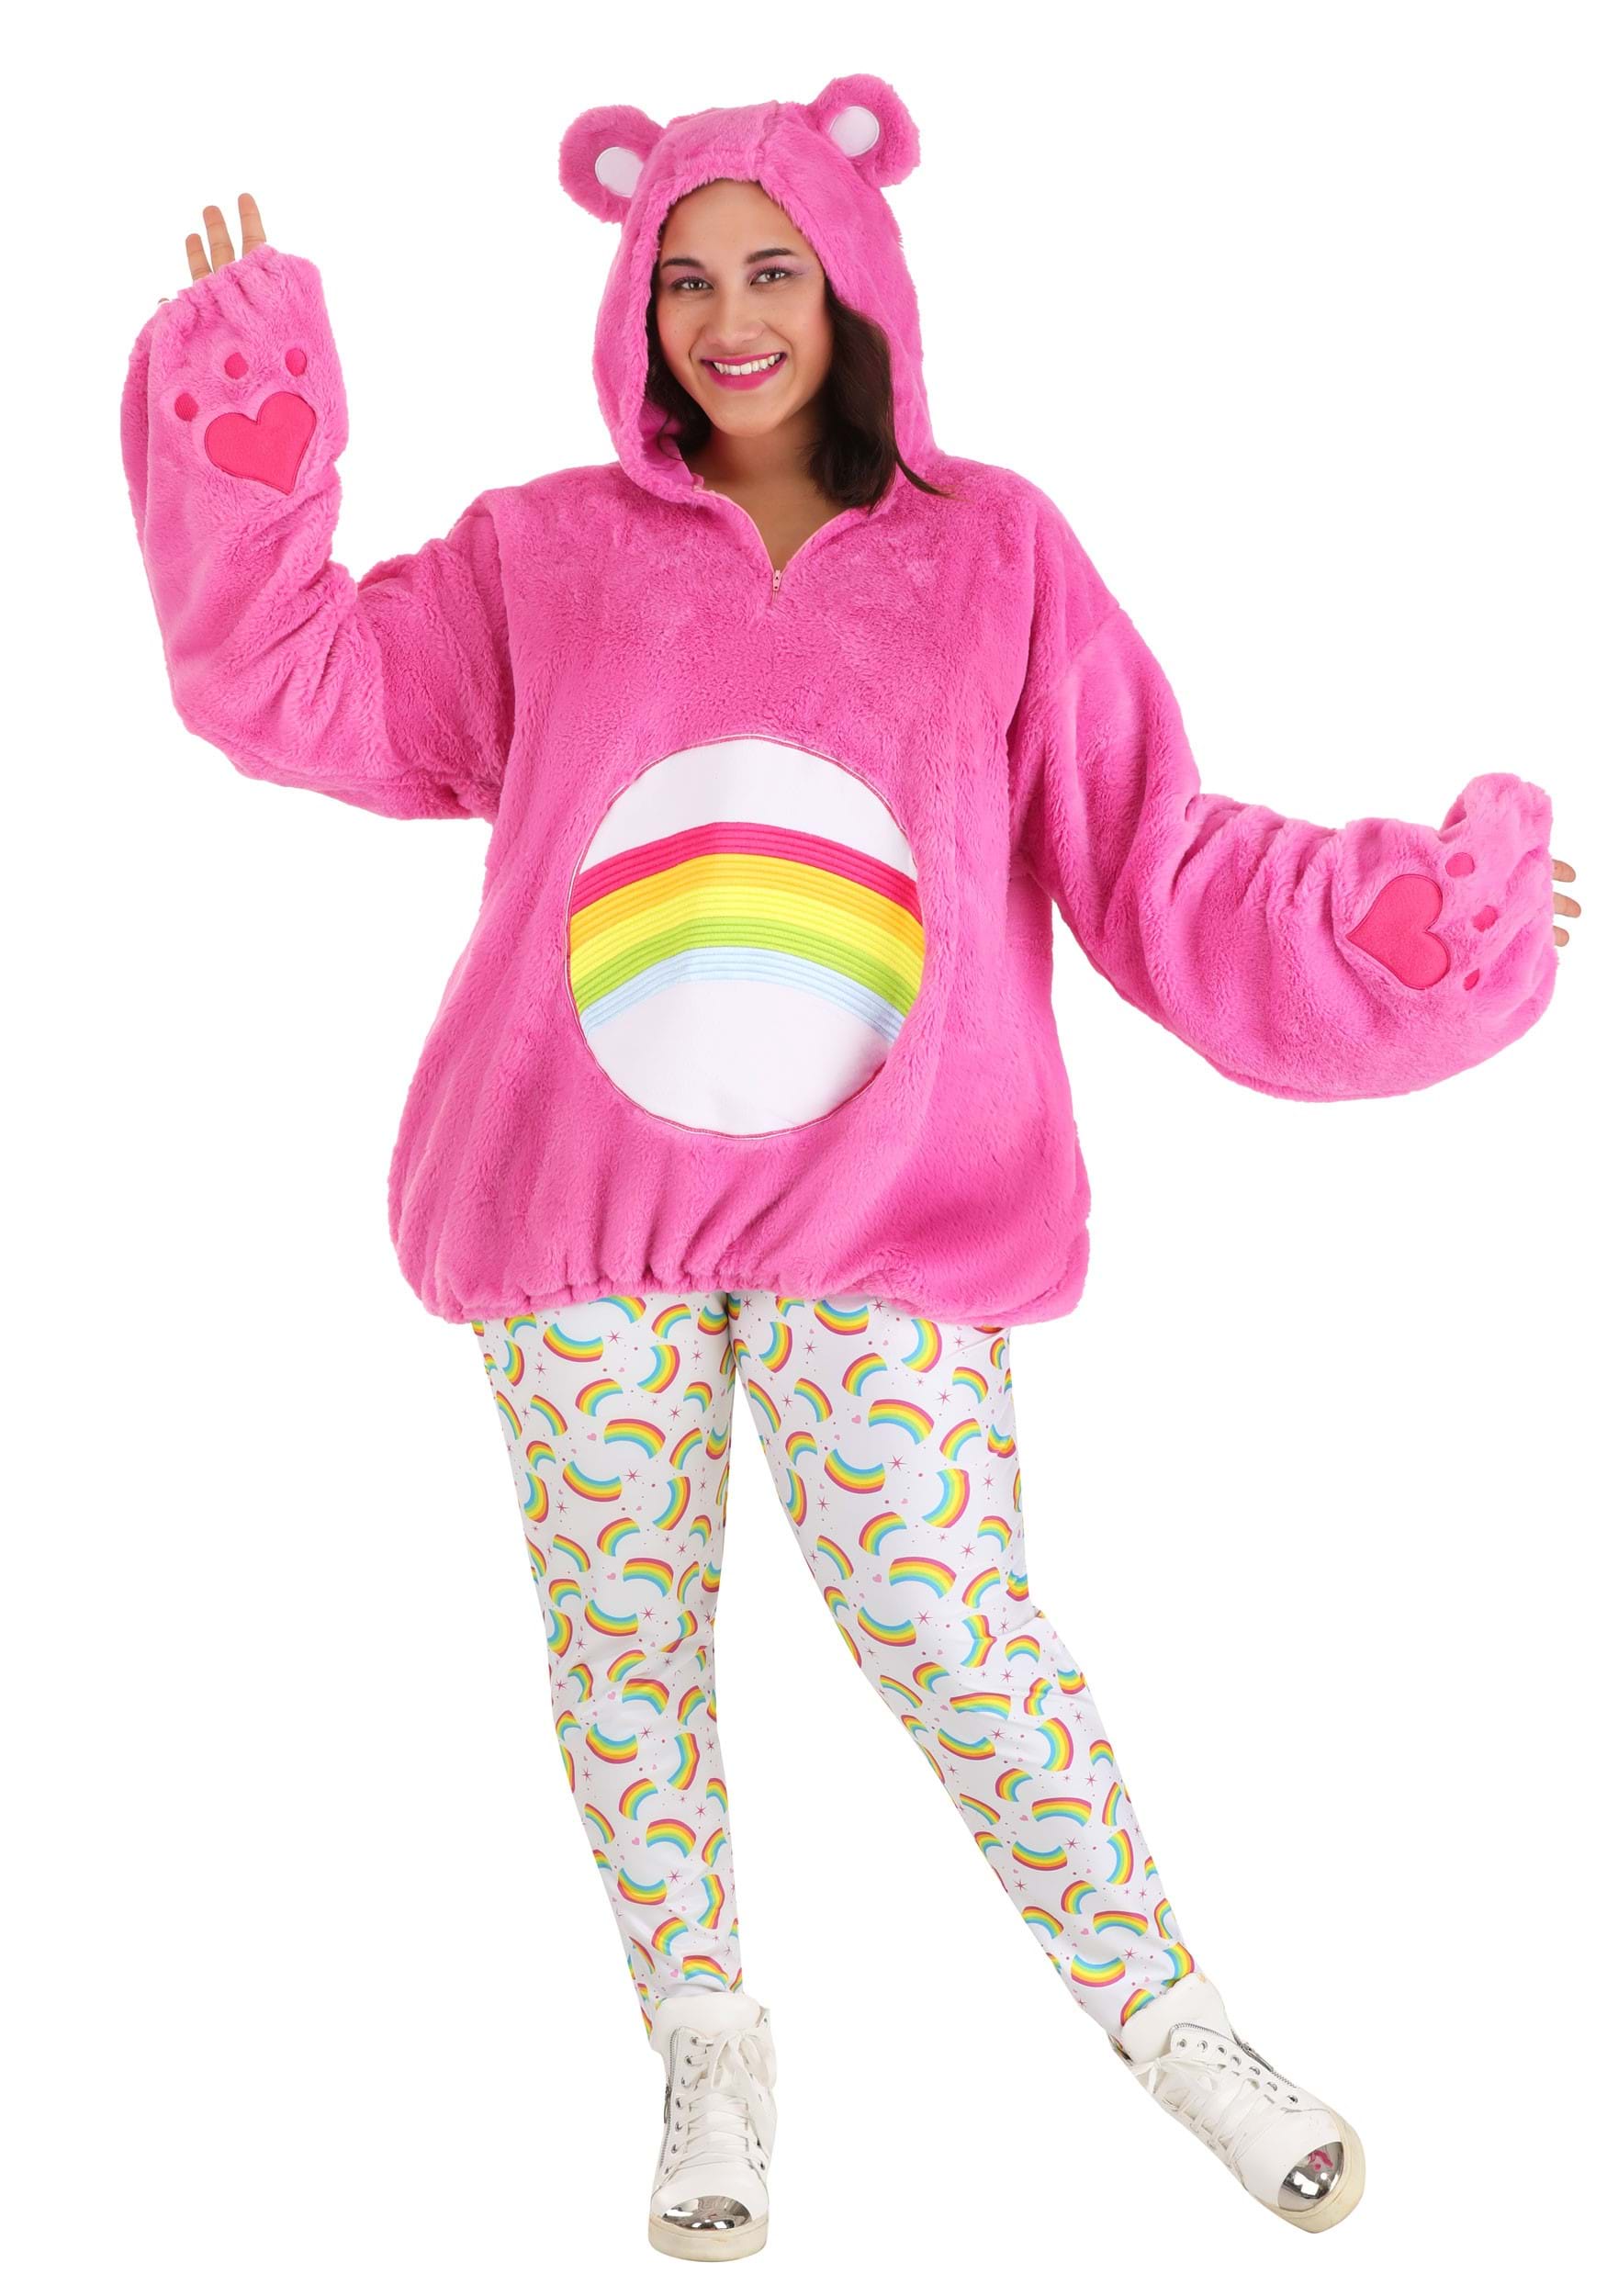 Photos - Fancy Dress CARE FUN Costumes Plus Size  Bears Deluxe Cheer Bear Hoodie Costume for Wom 